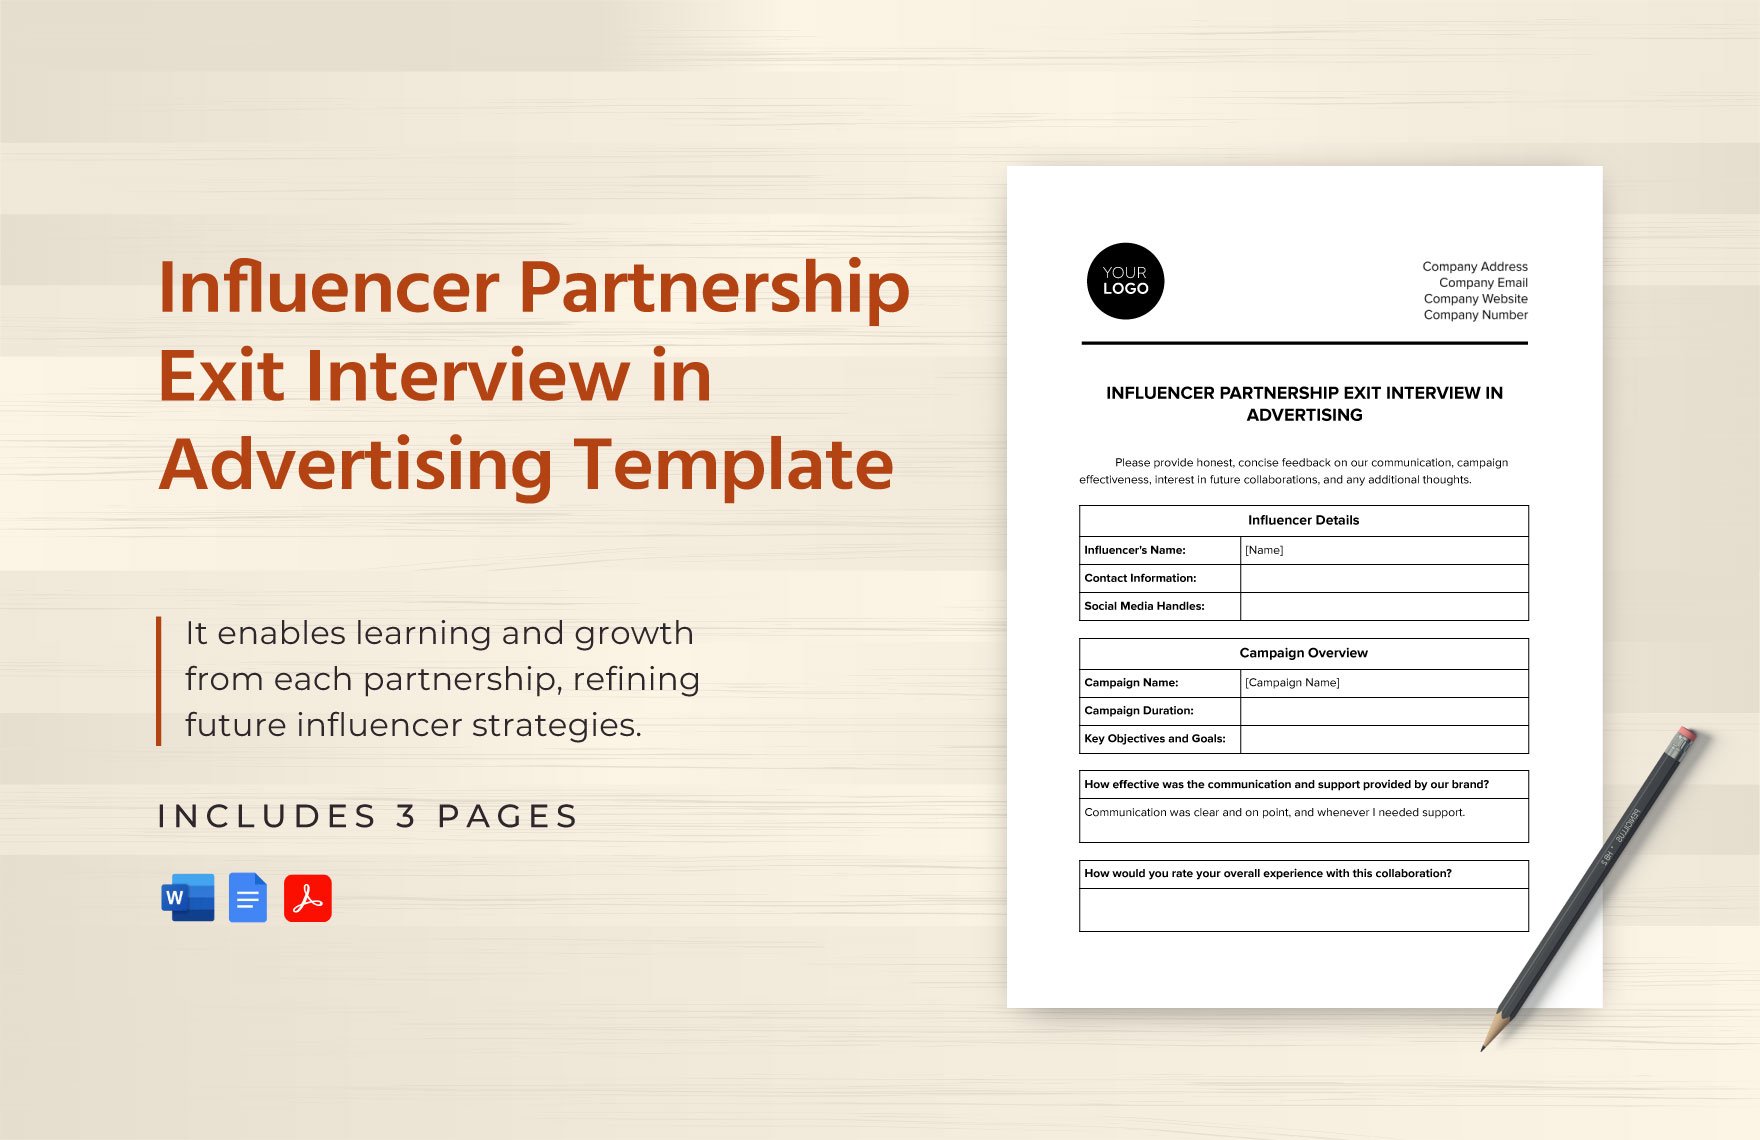 Influencer Partnership Exit Interview in Advertising Template in Word, Google Docs, PDF